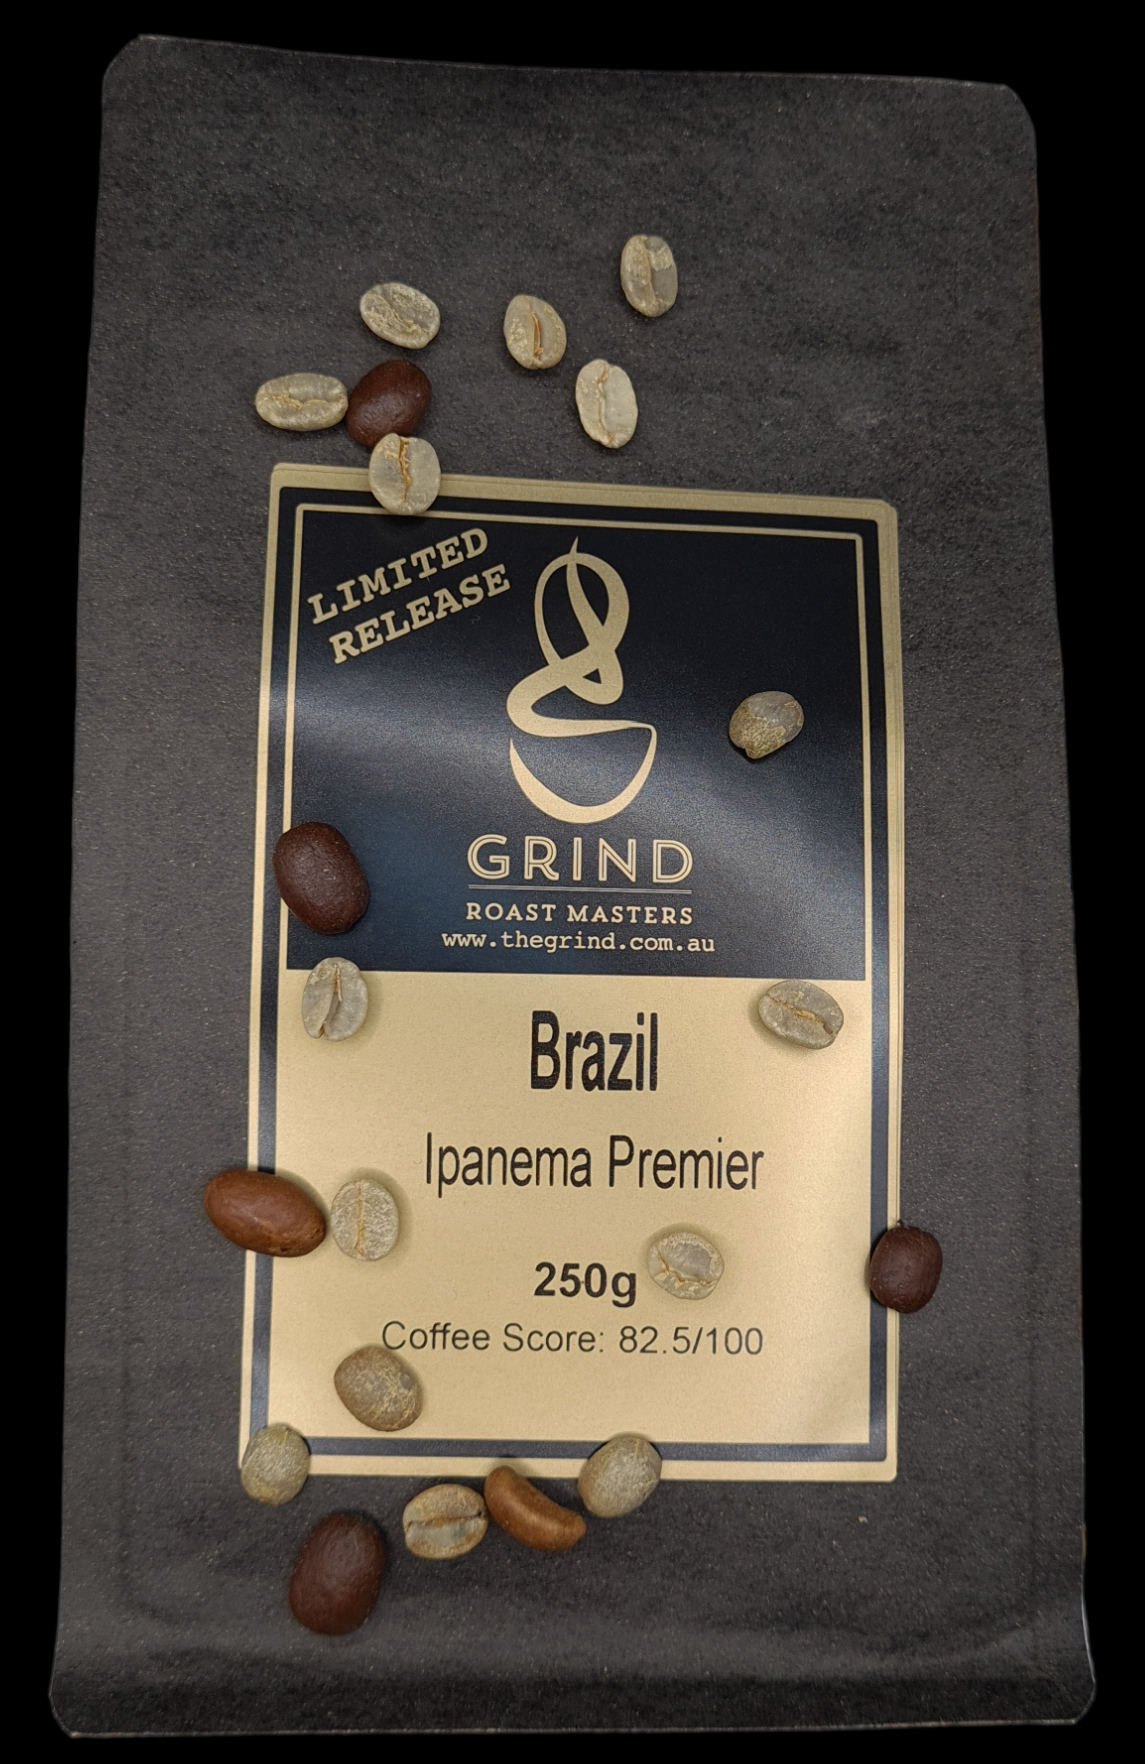 Brazil Ipanema Premier - Premium Coffee from $20.00. Shop now at Grind Roast Masters